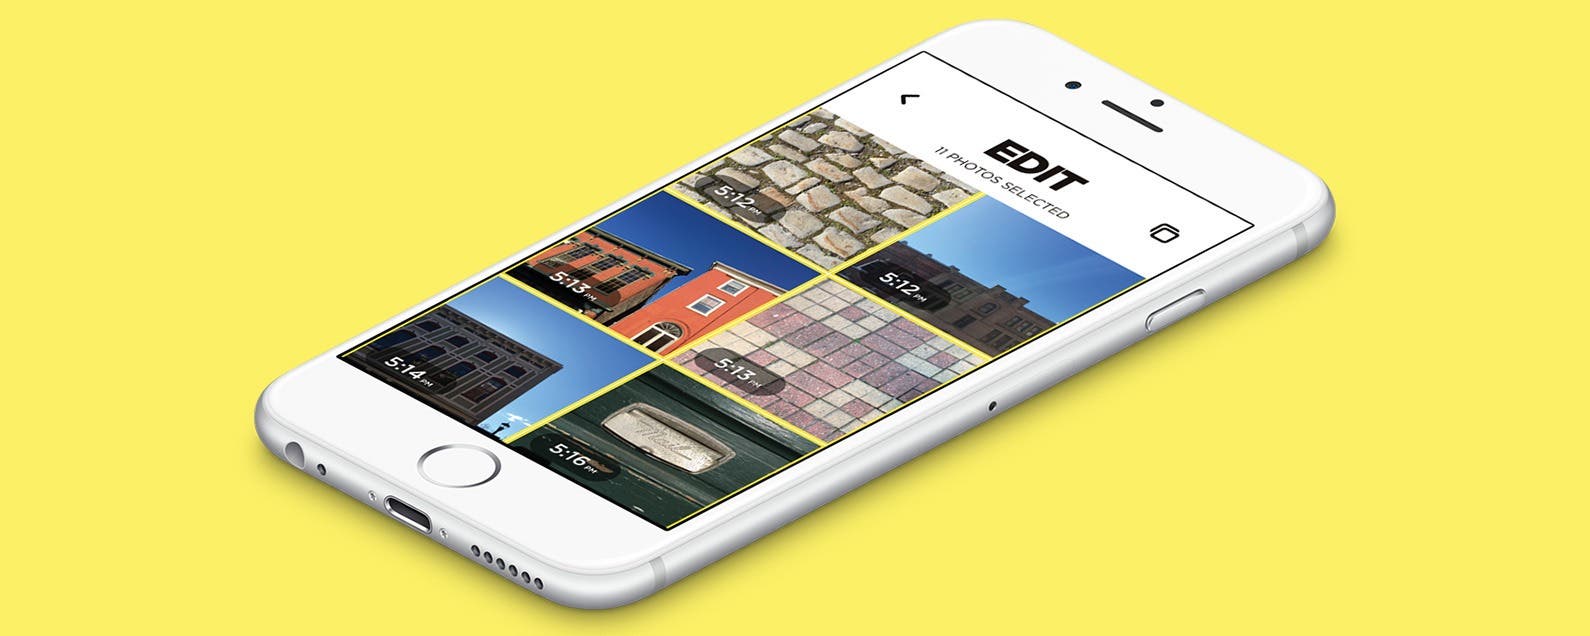 What's the best GIF maker app for iPhone?